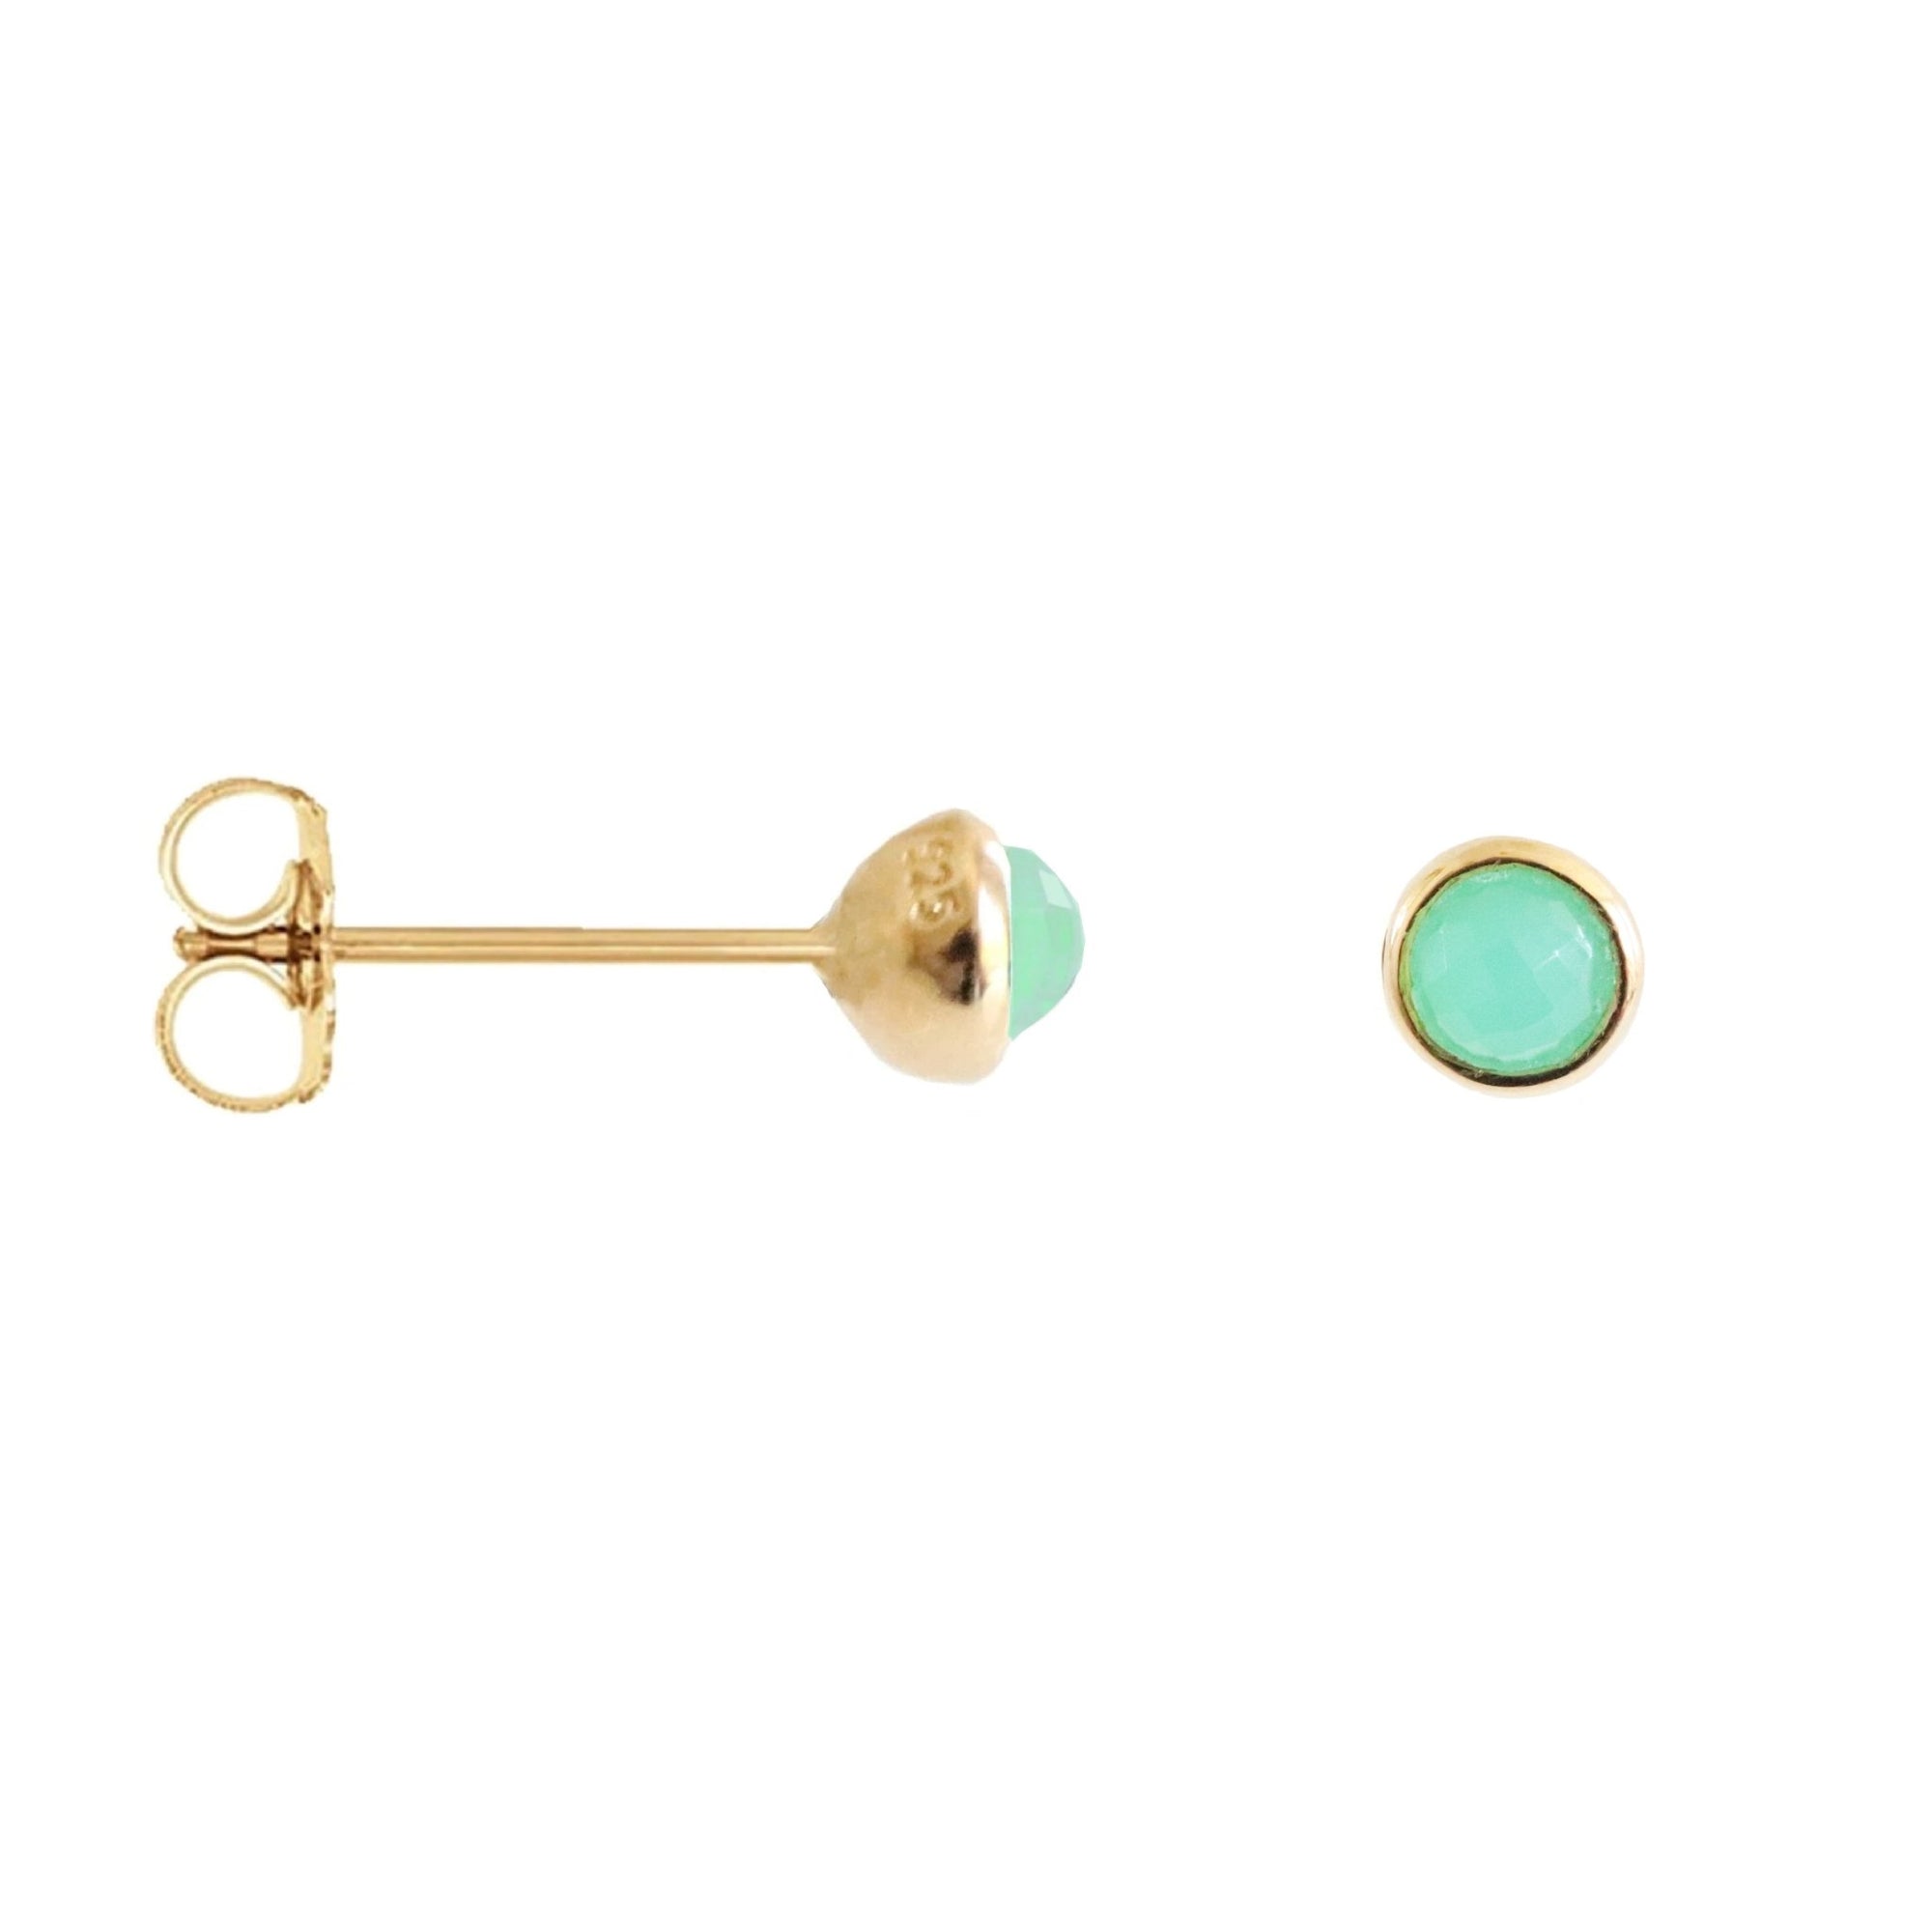 TINY PROTECT STUD EARRINGS - CHRYSOPRASE & GOLD - SO PRETTY CARA COTTER